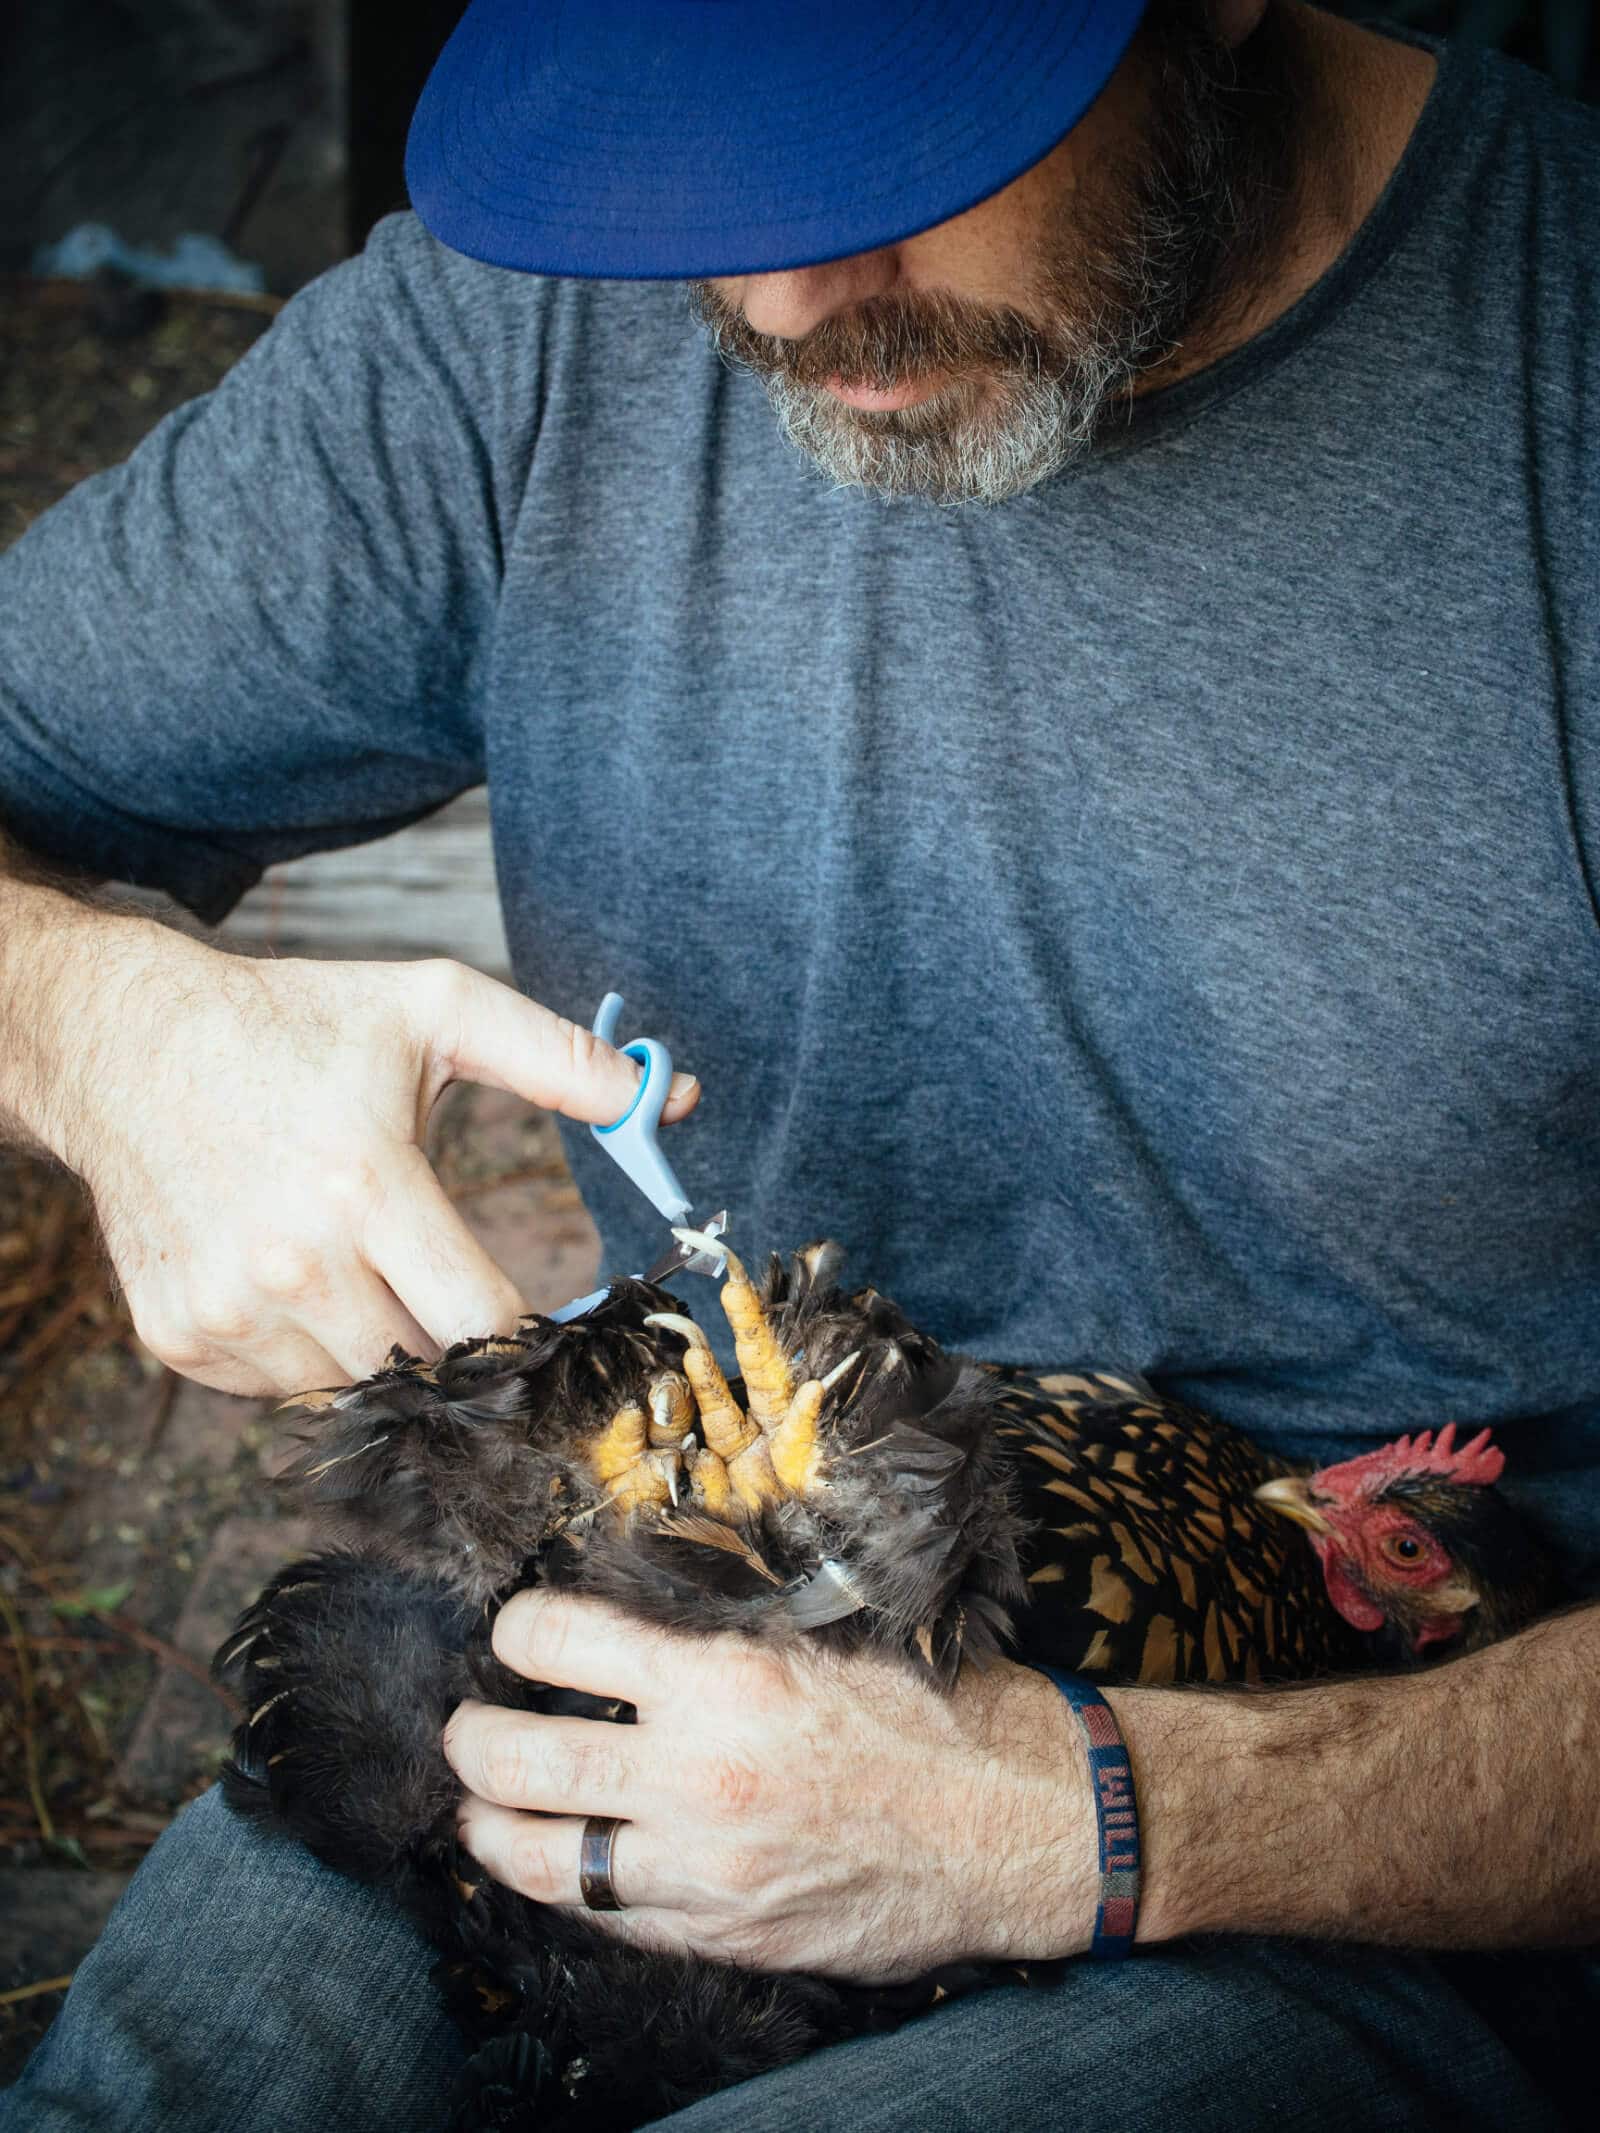 Cutting your chicken's nails is part of managing a healthy backyard flock